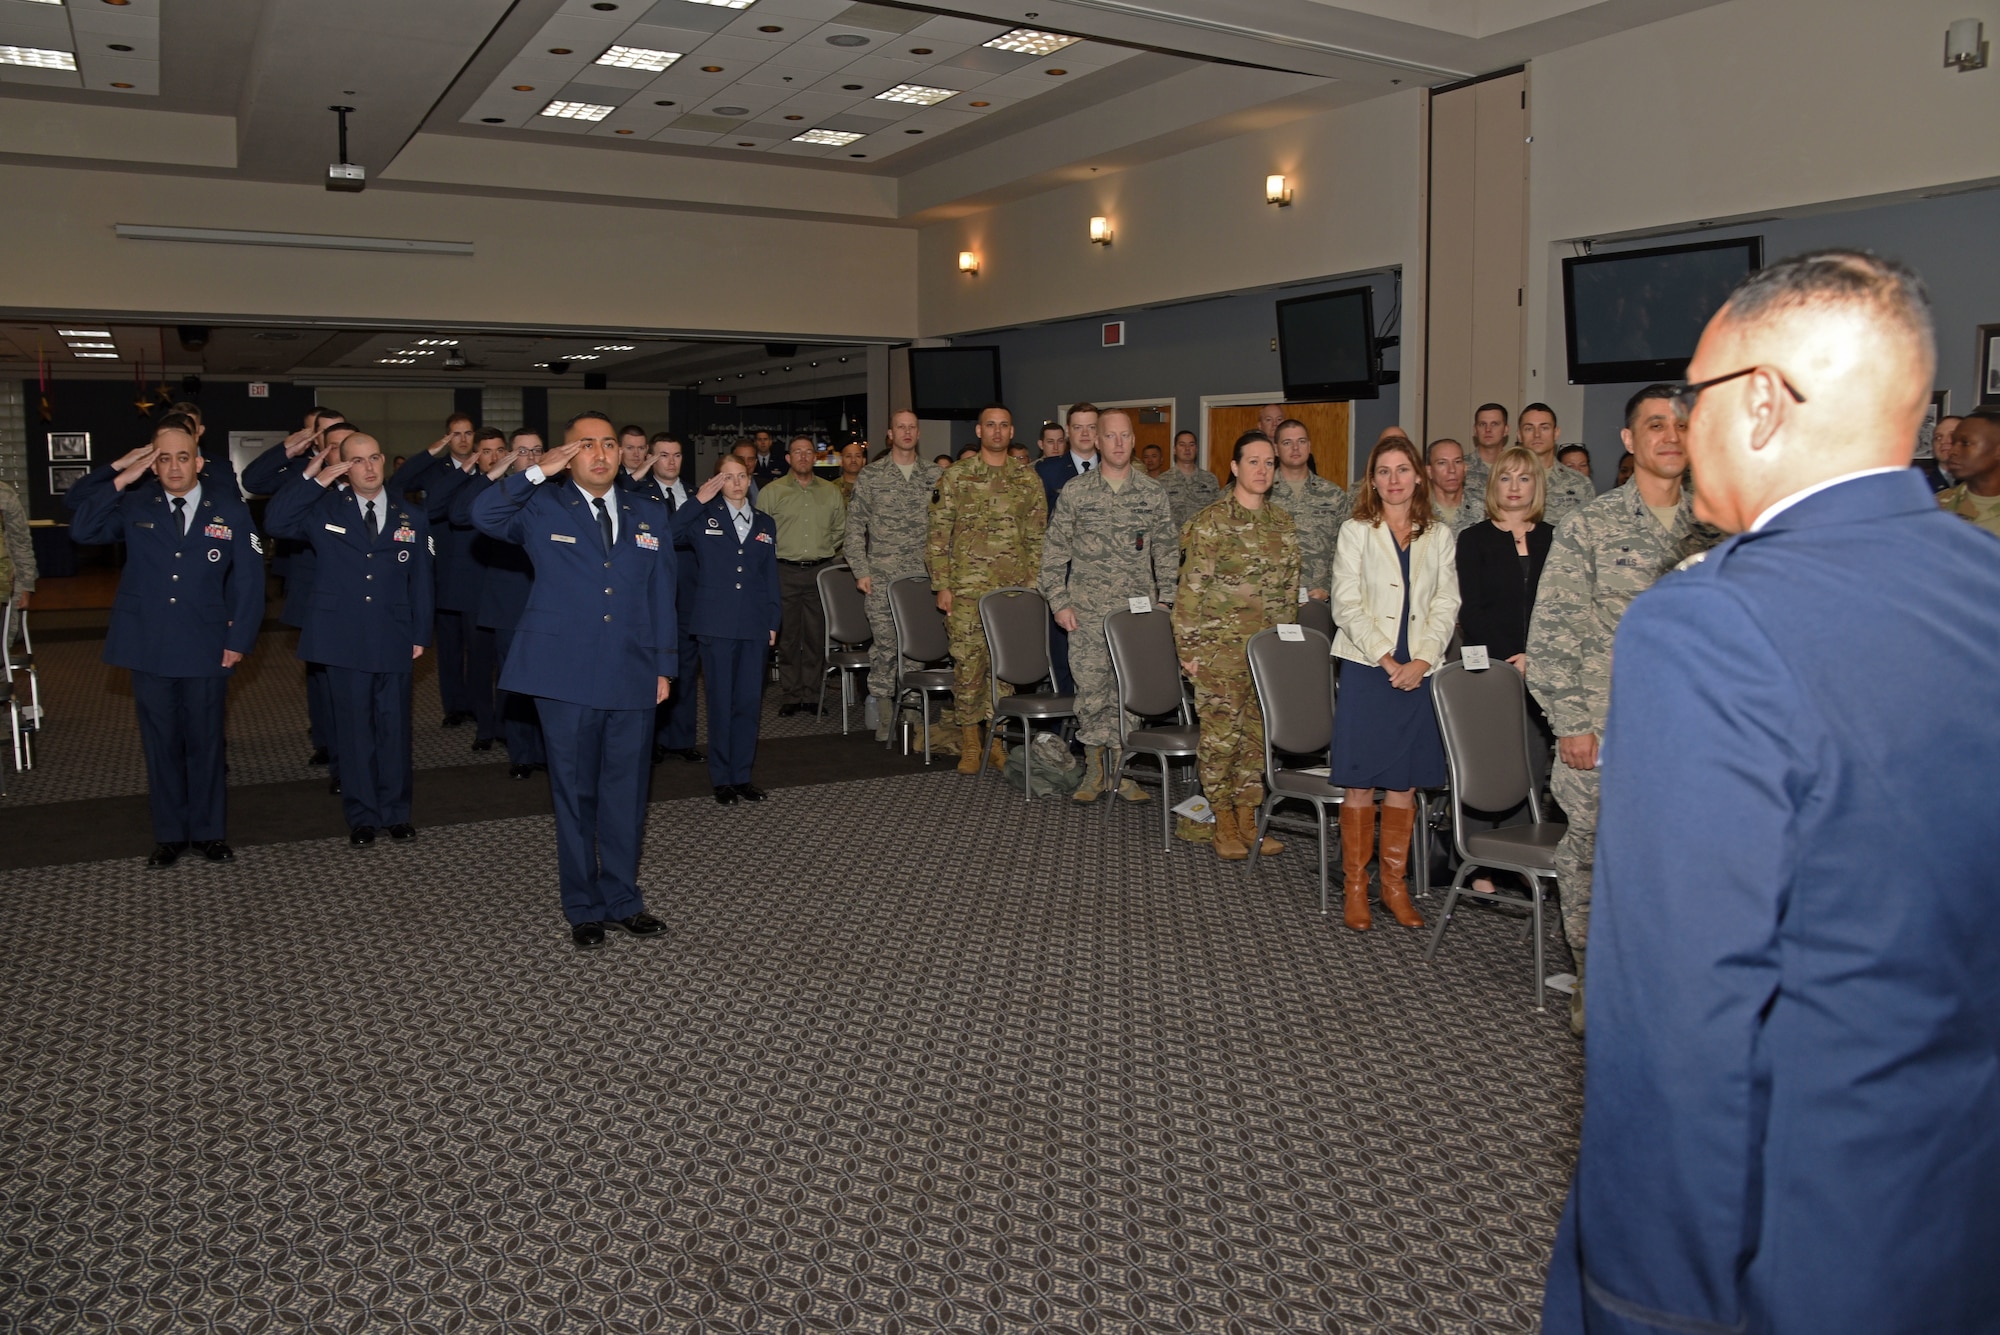 U.S. Air Force Lt. Col. David Sarabia, 313th Training Squadron commander, salutes his squadron for the first time during the 313th TRS Assumption of Command at the Event Center on Goodfellow Air Force Base, Texas, Oct. 24, 2018. The assumption of command ceremony provides an opportunity for members of the unit to see their new commander, and for the new commander to inspect his or her troops. (U.S. Air Force photo by Staff Sgt. Joshua Edwards/Released)